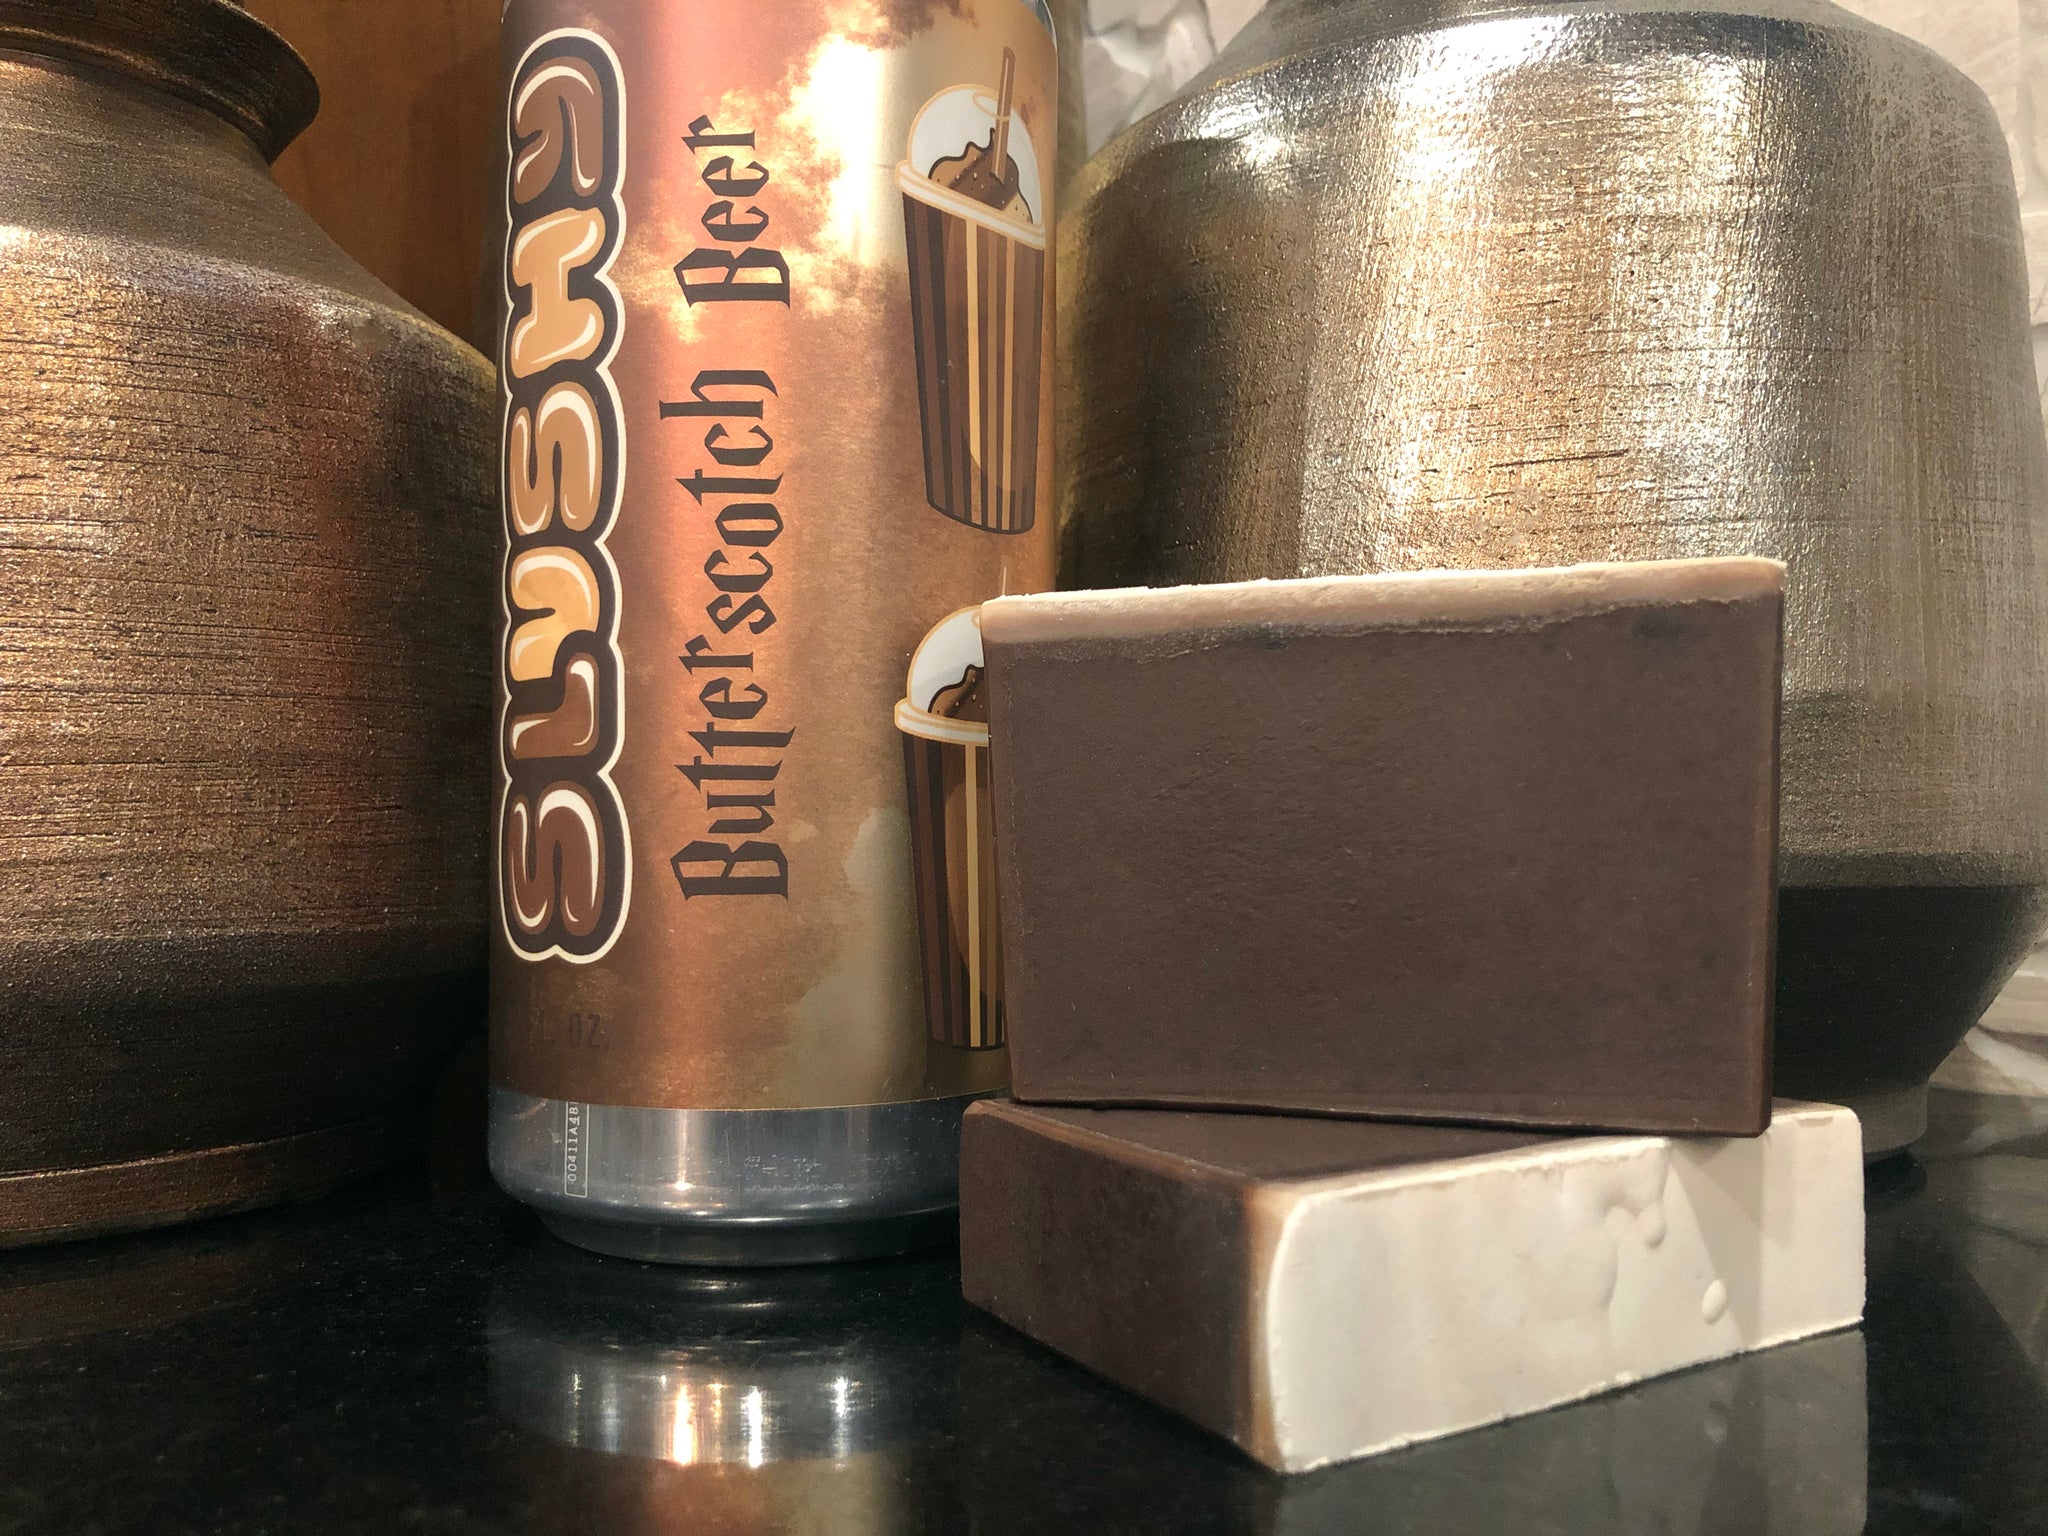 butterscotch craft beer soap handmade in indiana with butterscotch beer from 450 north brewing company Harry Potter inspired soap butterbeer soap brown and white butterscotch scented craft beer soap spunkndisorderly beer soap for her unique gift ideas for beer lovers Harry Potter inspired beer